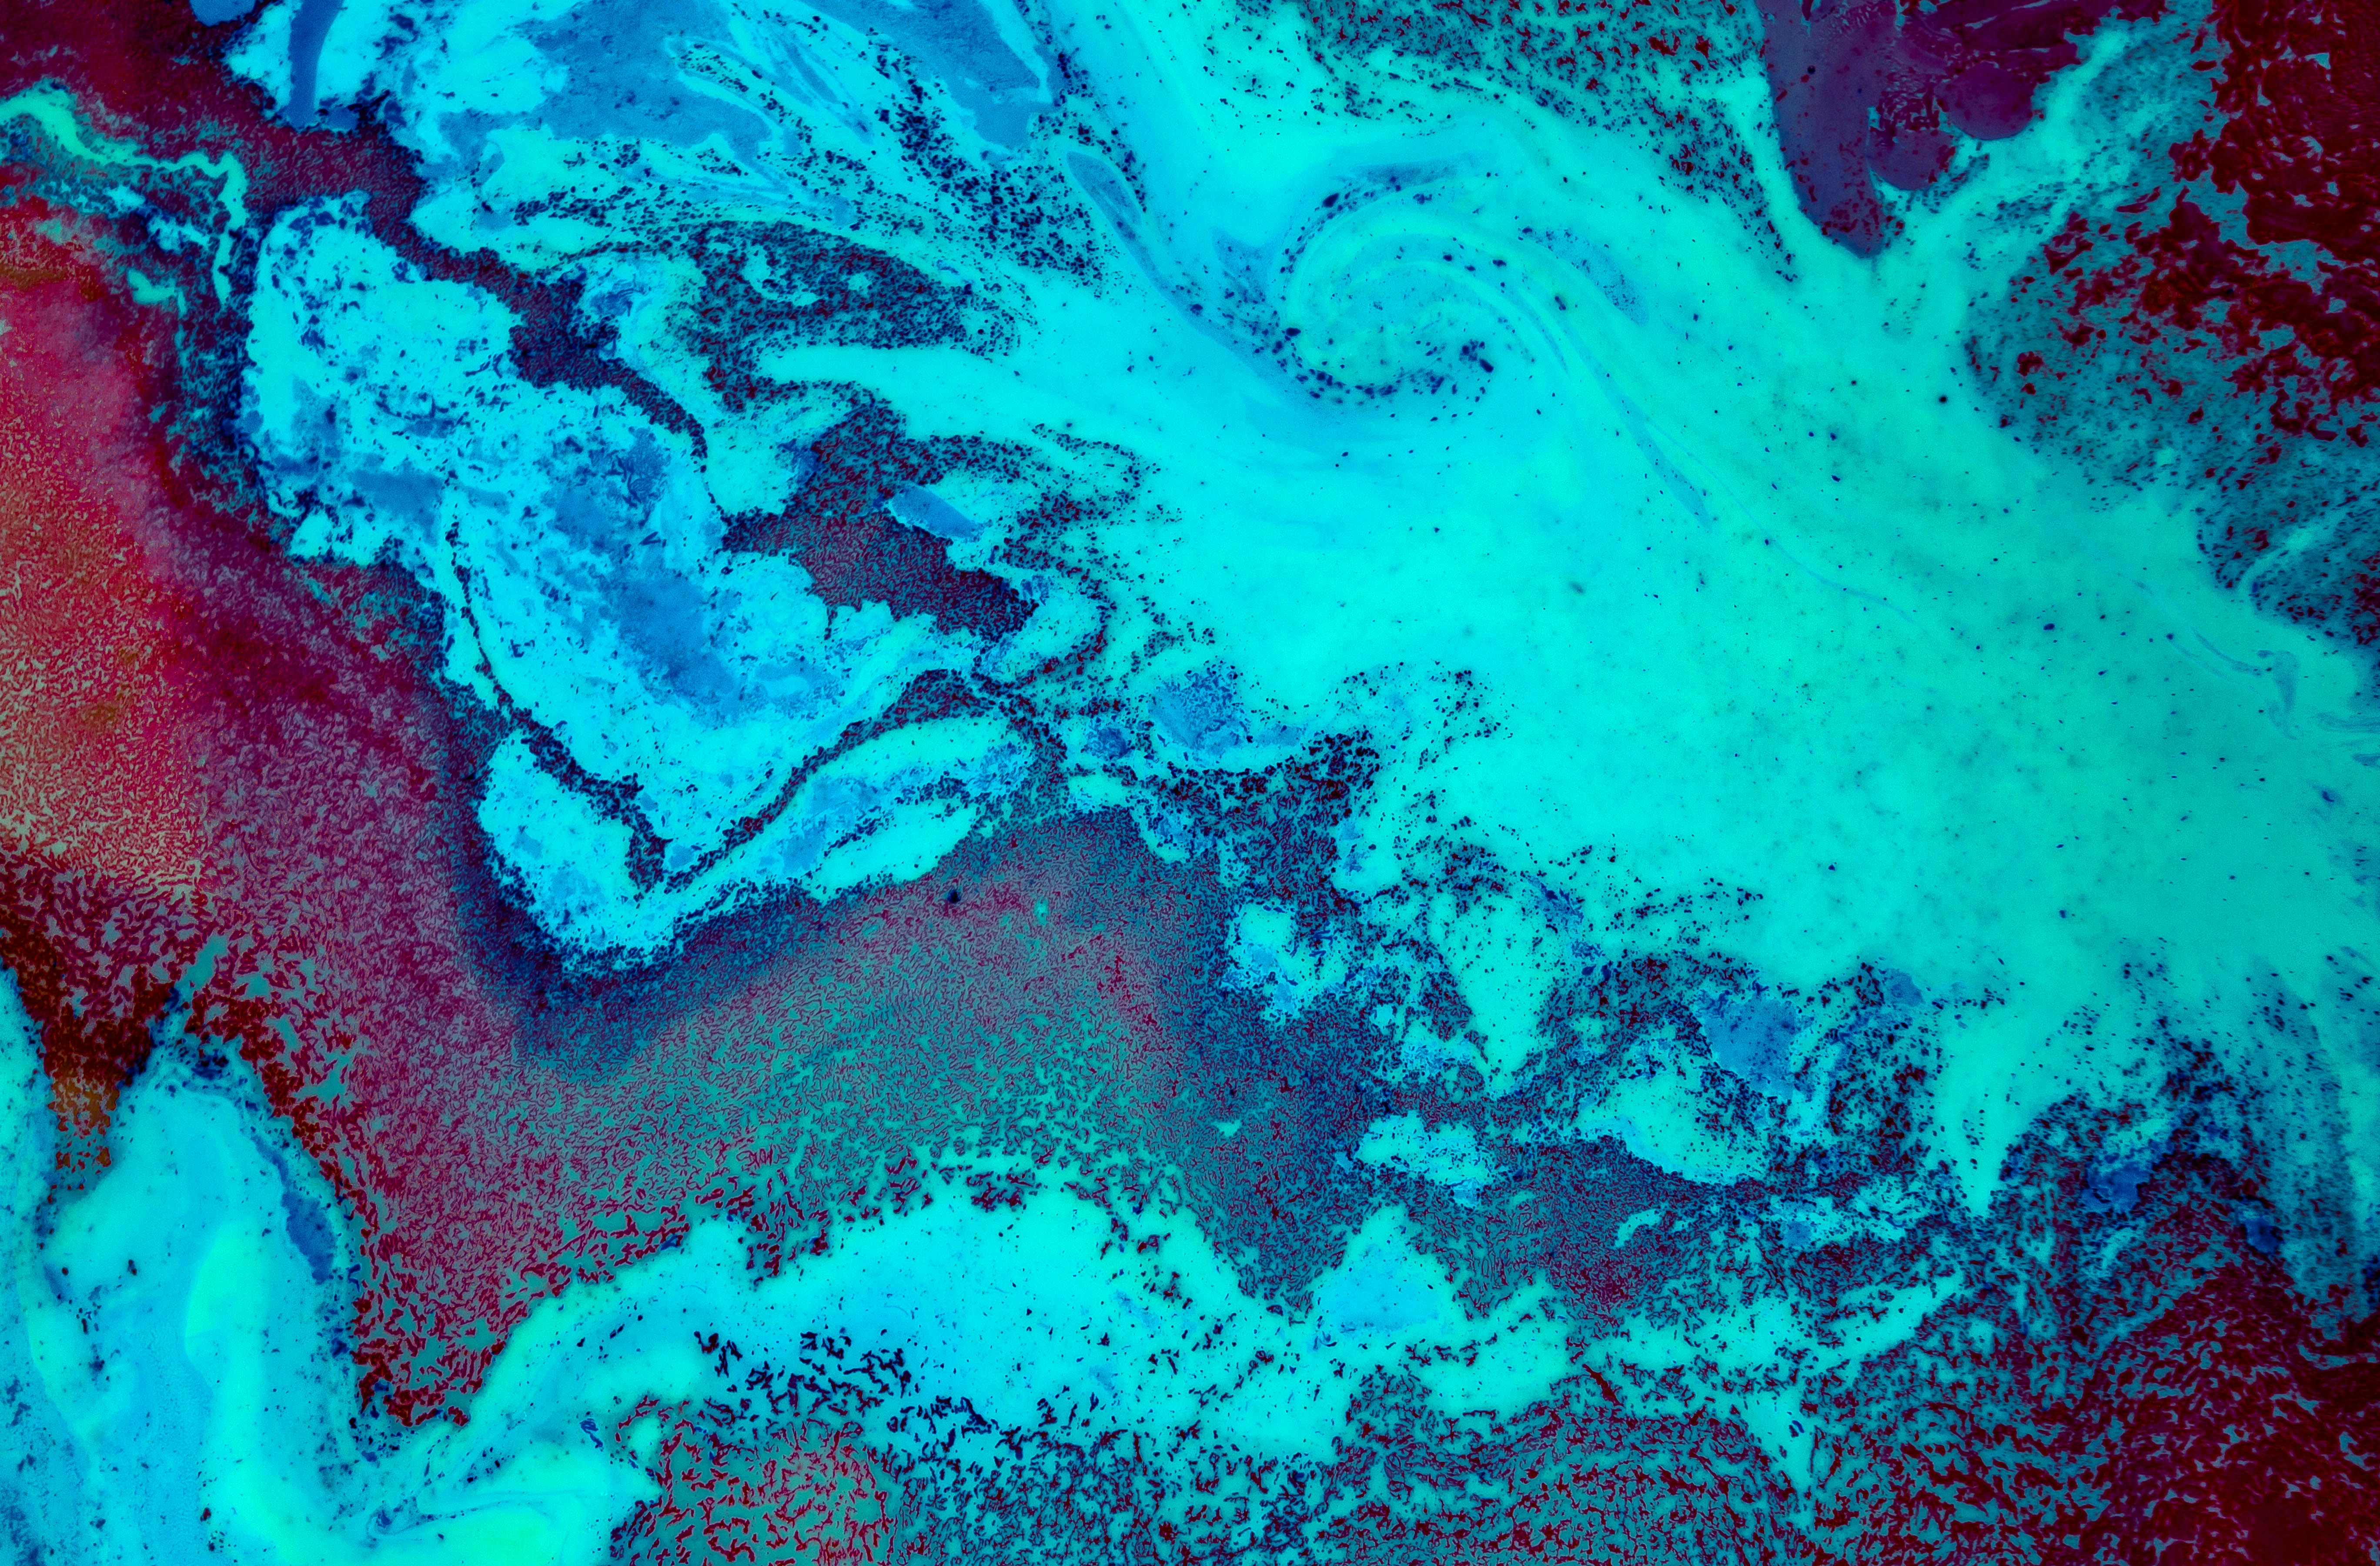 This photo was made with some experimental liquids as milk, water paint and oil. I’ve made this with a friend and we had so much fun doing it. The surprise of the reactions thought the different material was both charming and changeling. I truly recommend everyone to try something like this, let’s share the different results. Have fun using this picture.